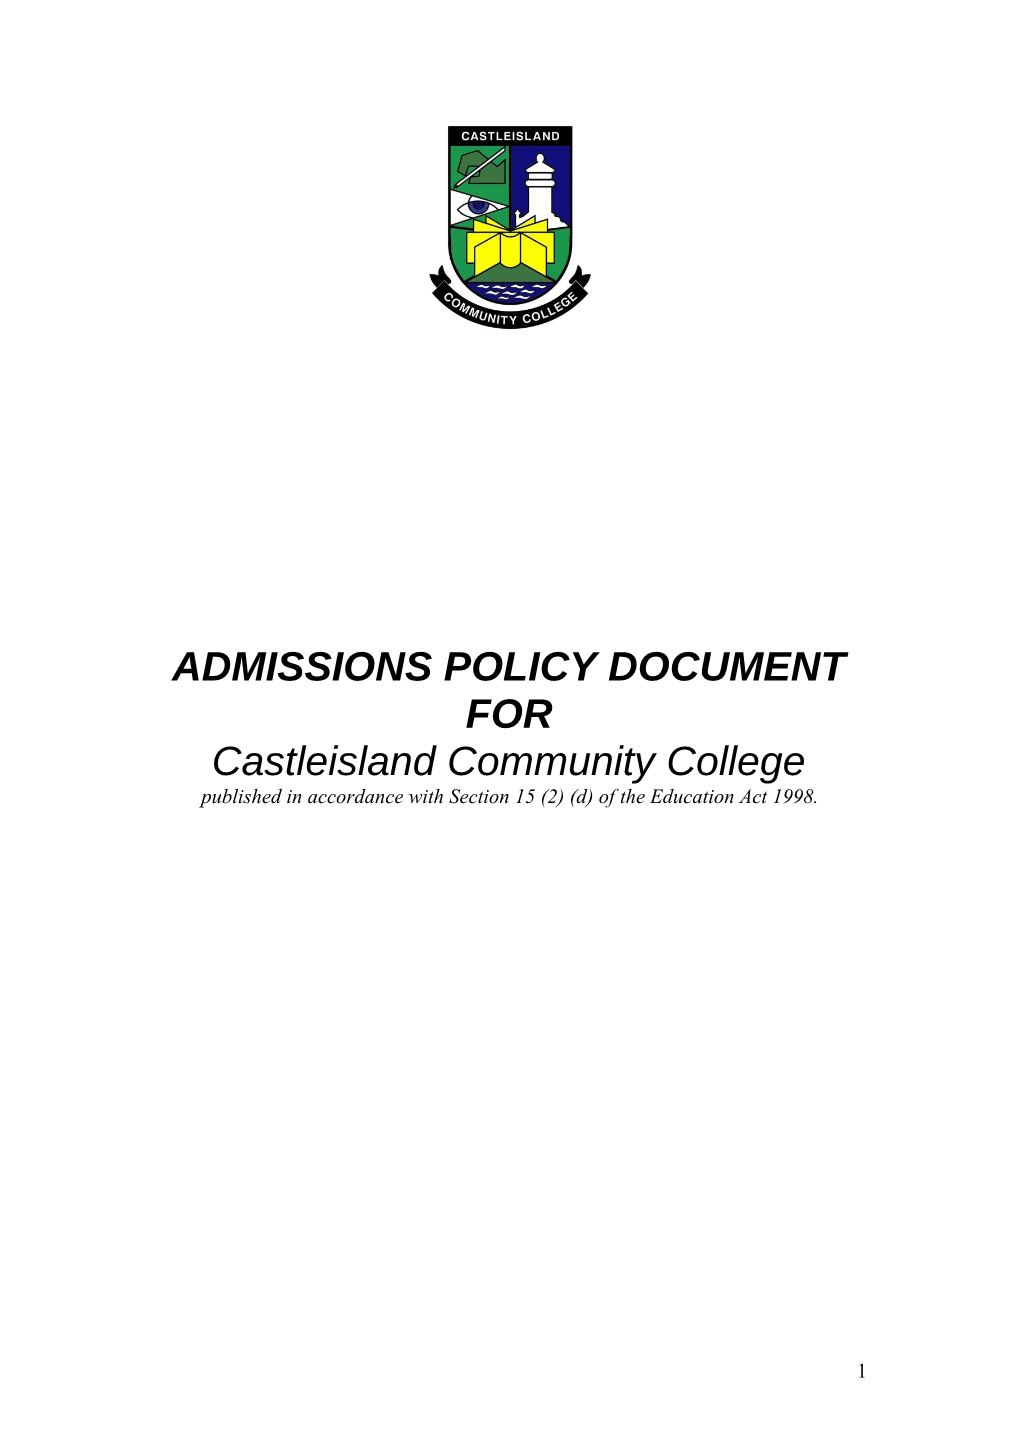 Model Admissions Policy